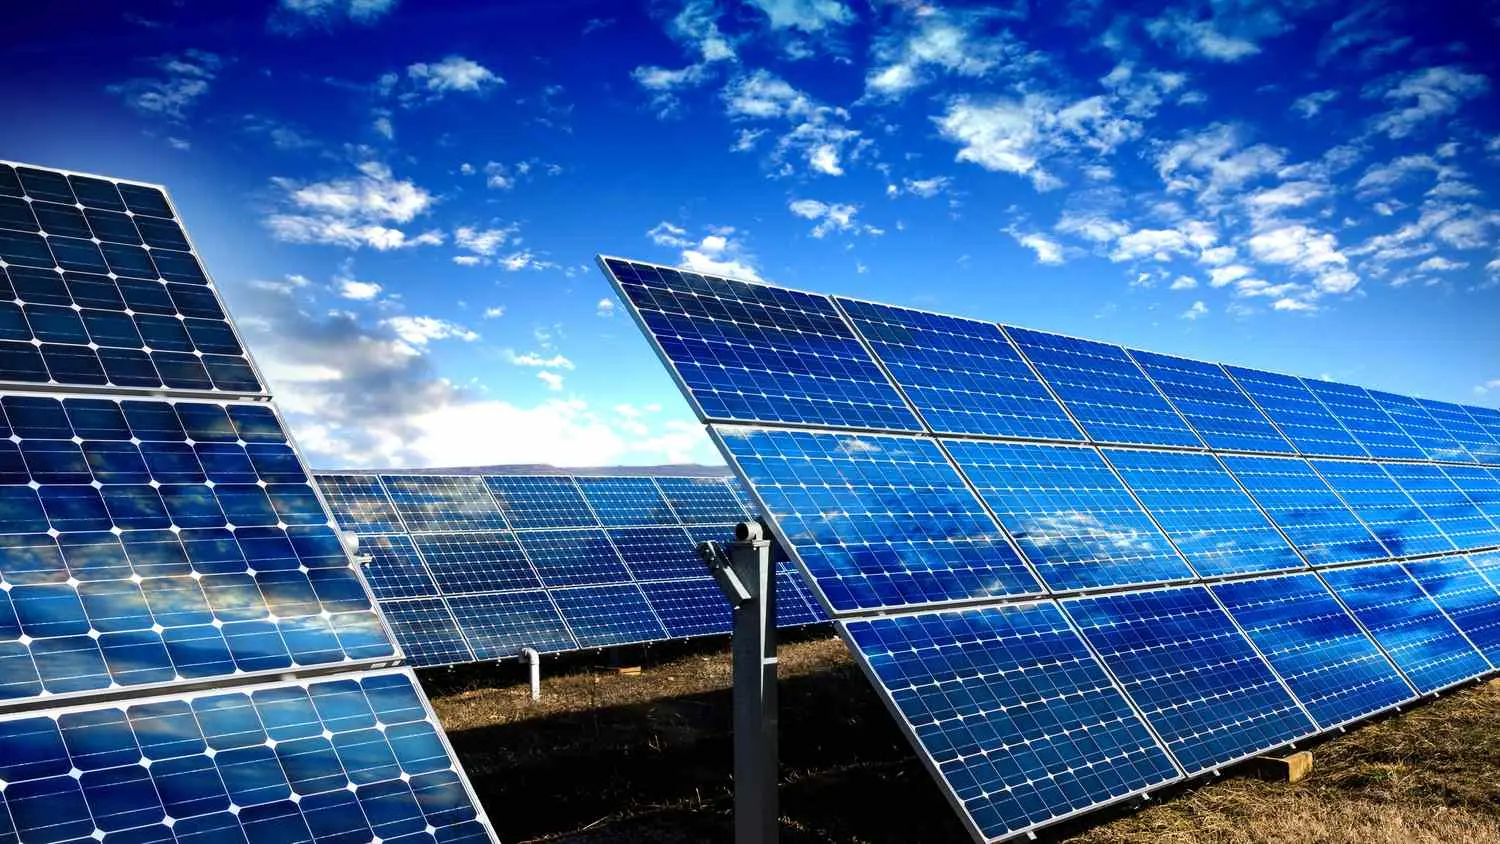 solar energy definition - What is solar energy in one word